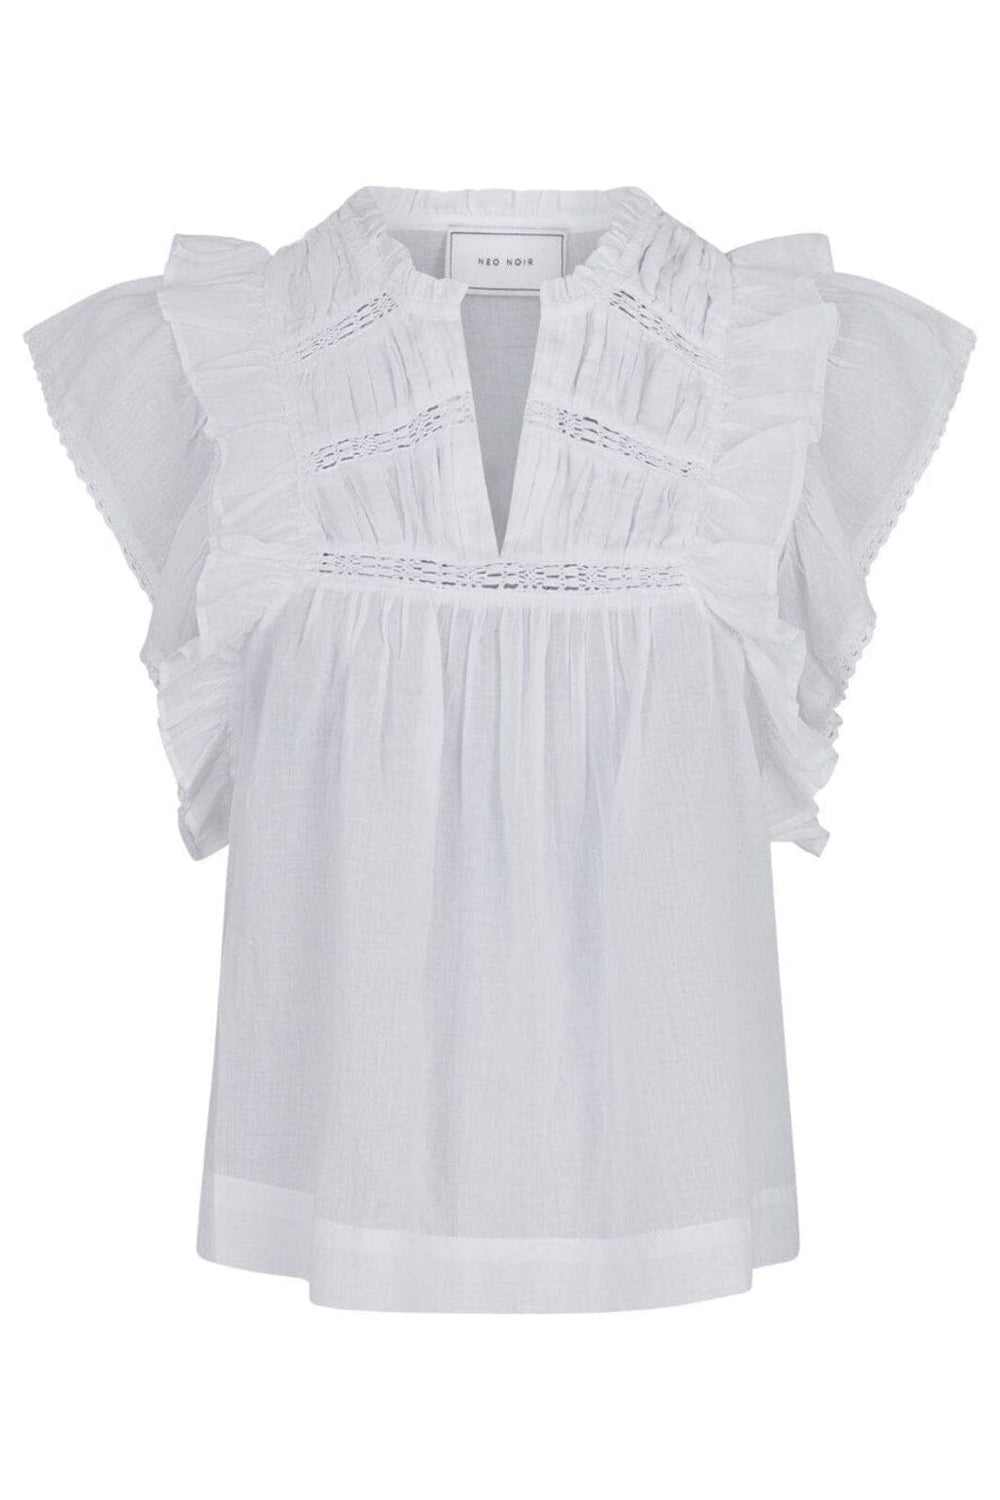 Neo Noir - Jayla S Voile Top - White Toppe 